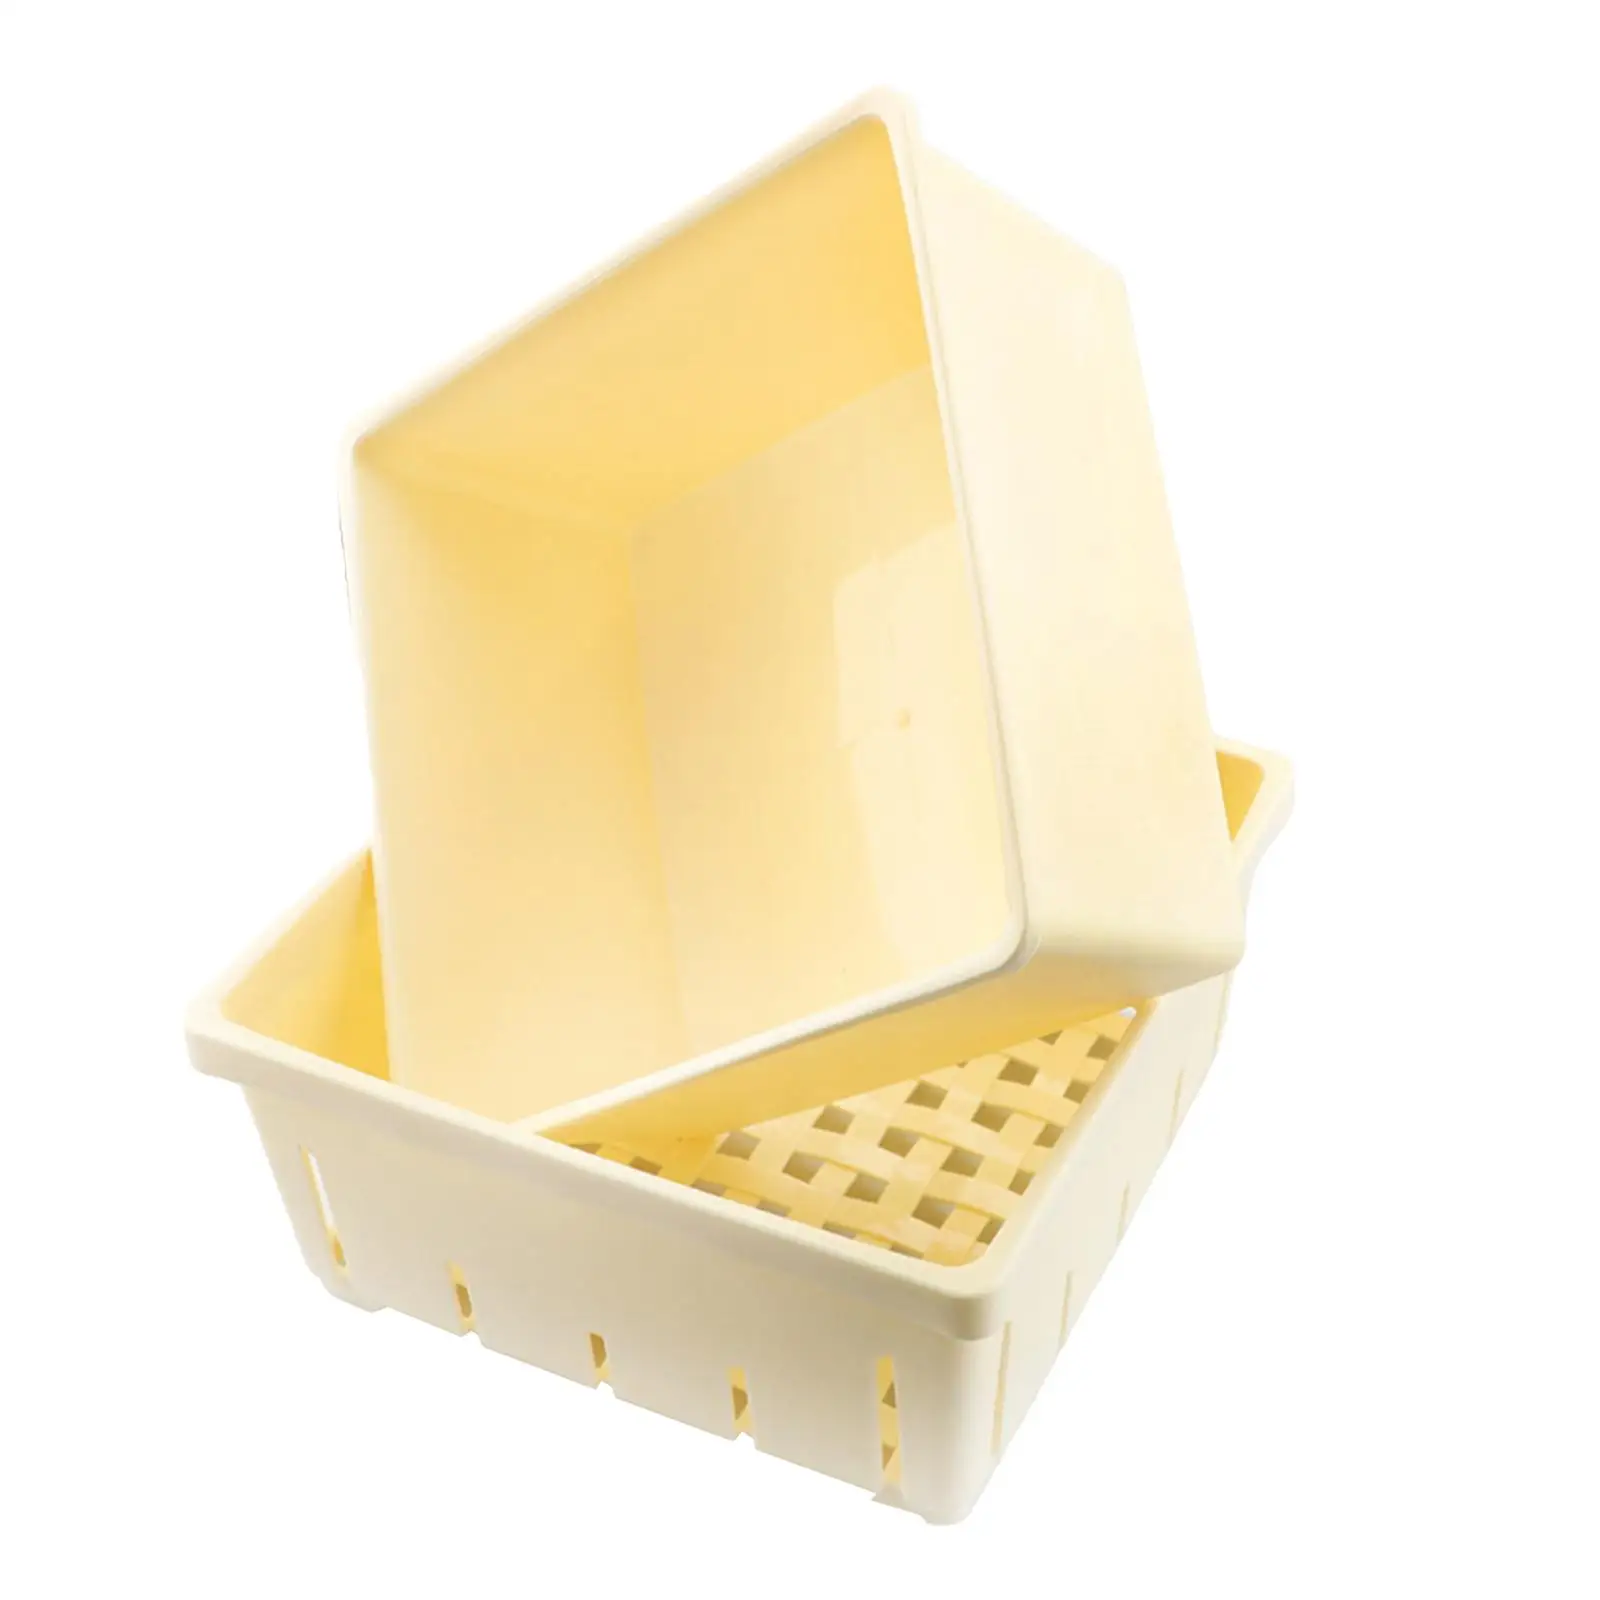 DIY Tofu Press Mould Easily Remove Water Manual Tool Soybean Curd Making Machine Portable Kitchen Utensils for Home Use Cheese